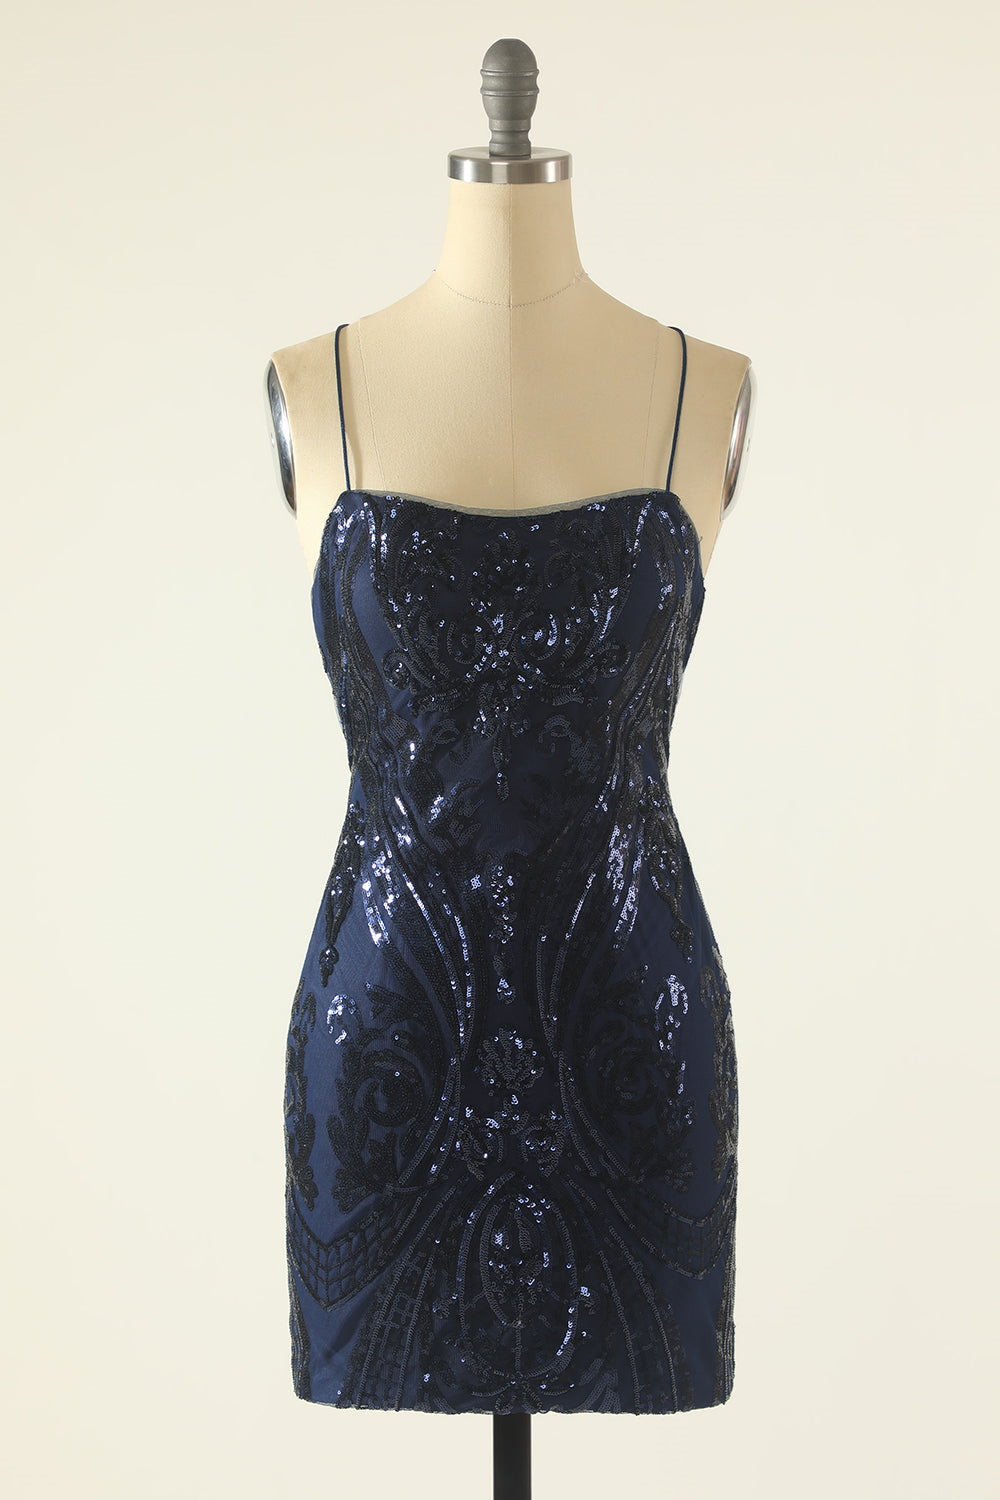 Dark Navy Lace-Up Sheath Sequins-Embroidered Homecoming Dress